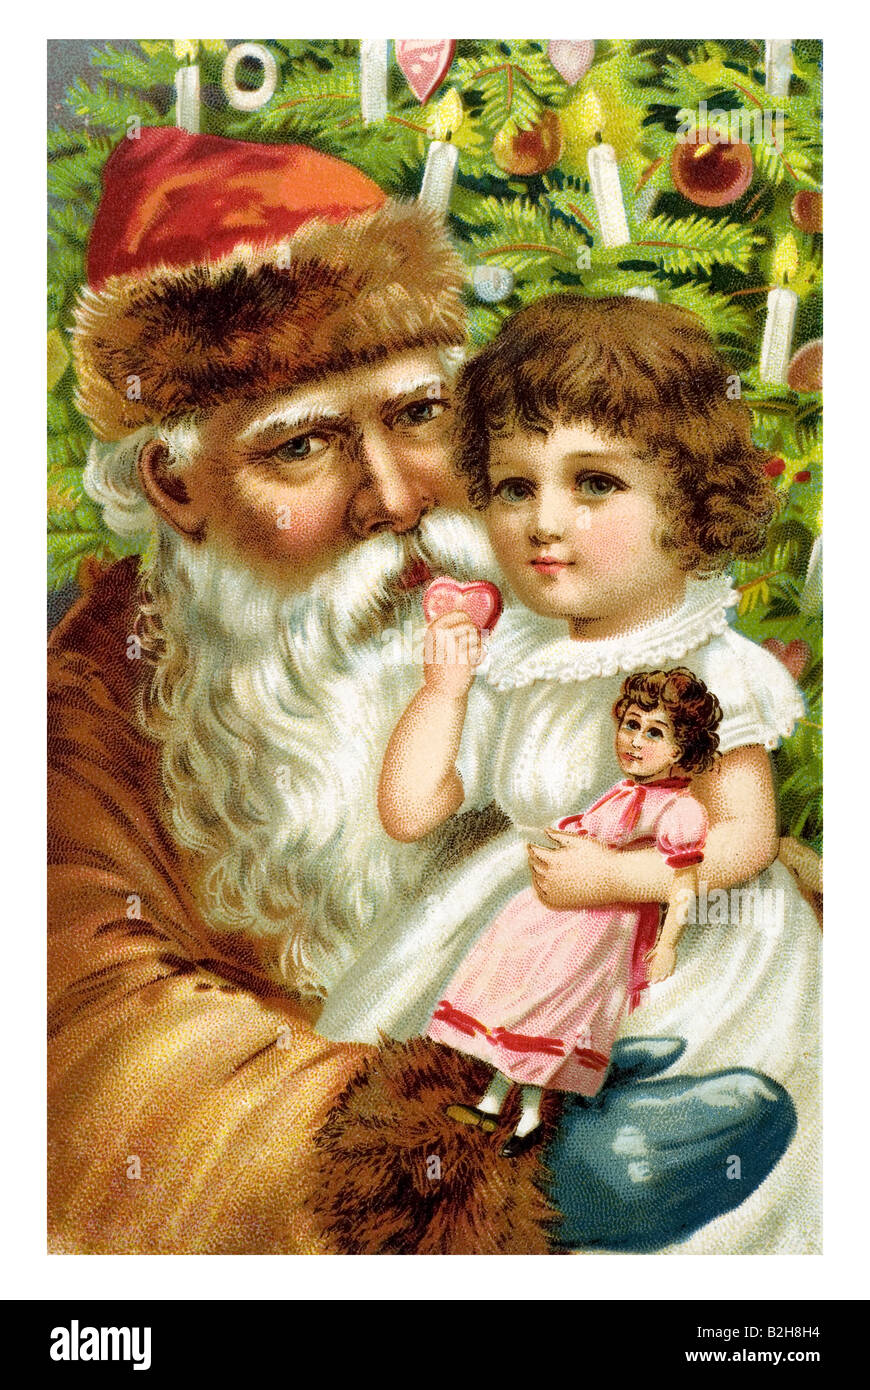 Postcard motive Father Christmas makes the hearts of children happy 19th century Germany Stock Photo